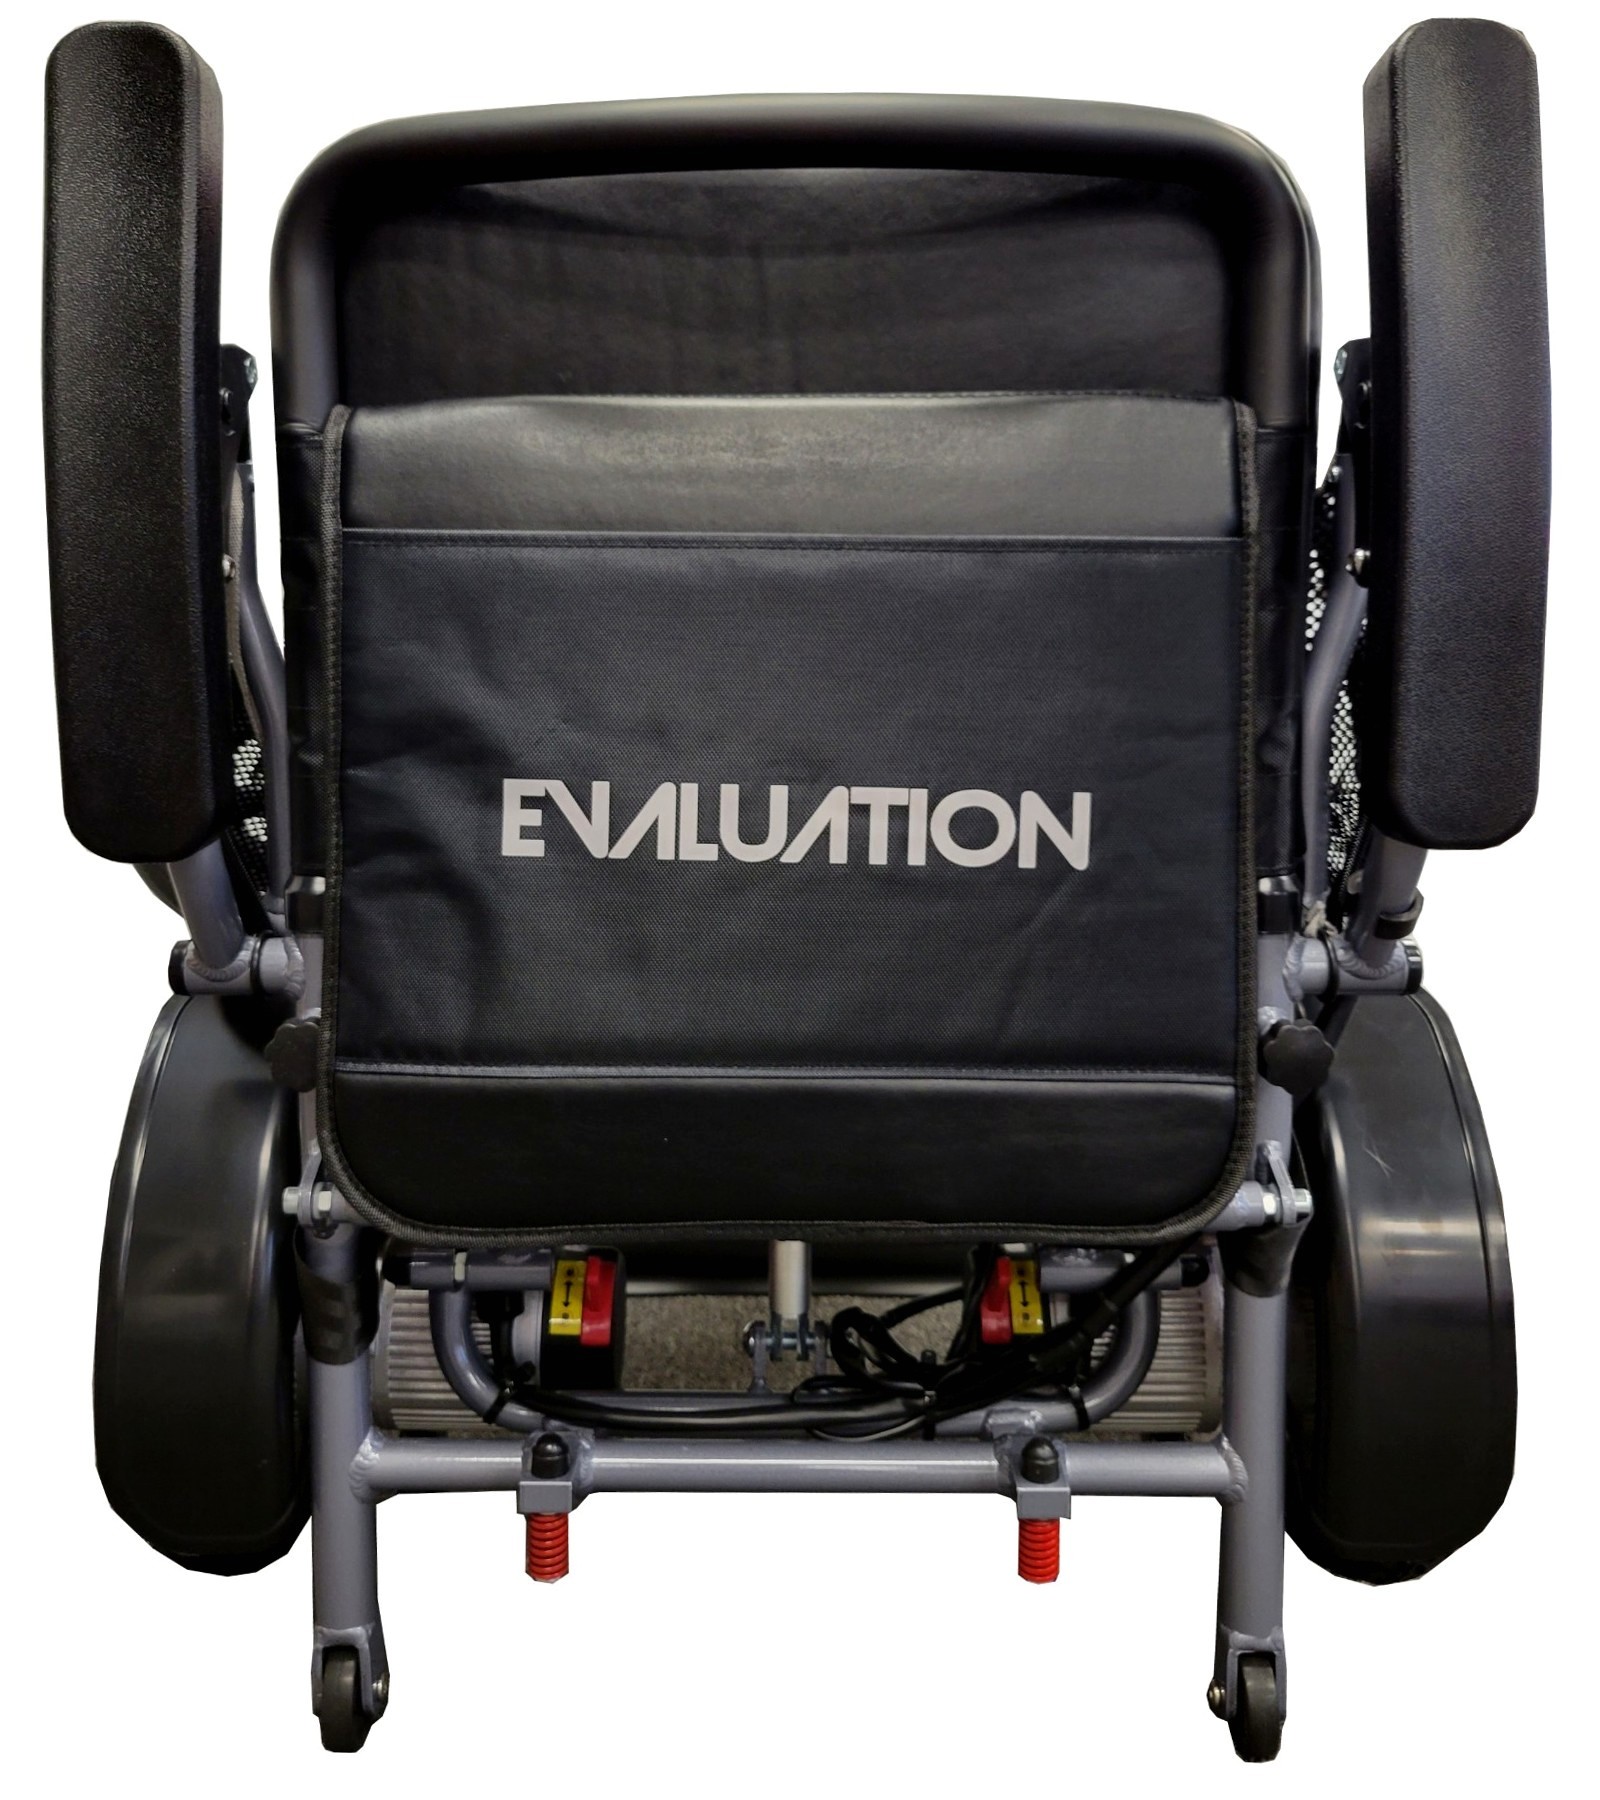 https://www.discovermymobility.com/store/powerwheelchairs/green-transporter/evalution/evolution-folded.jpg